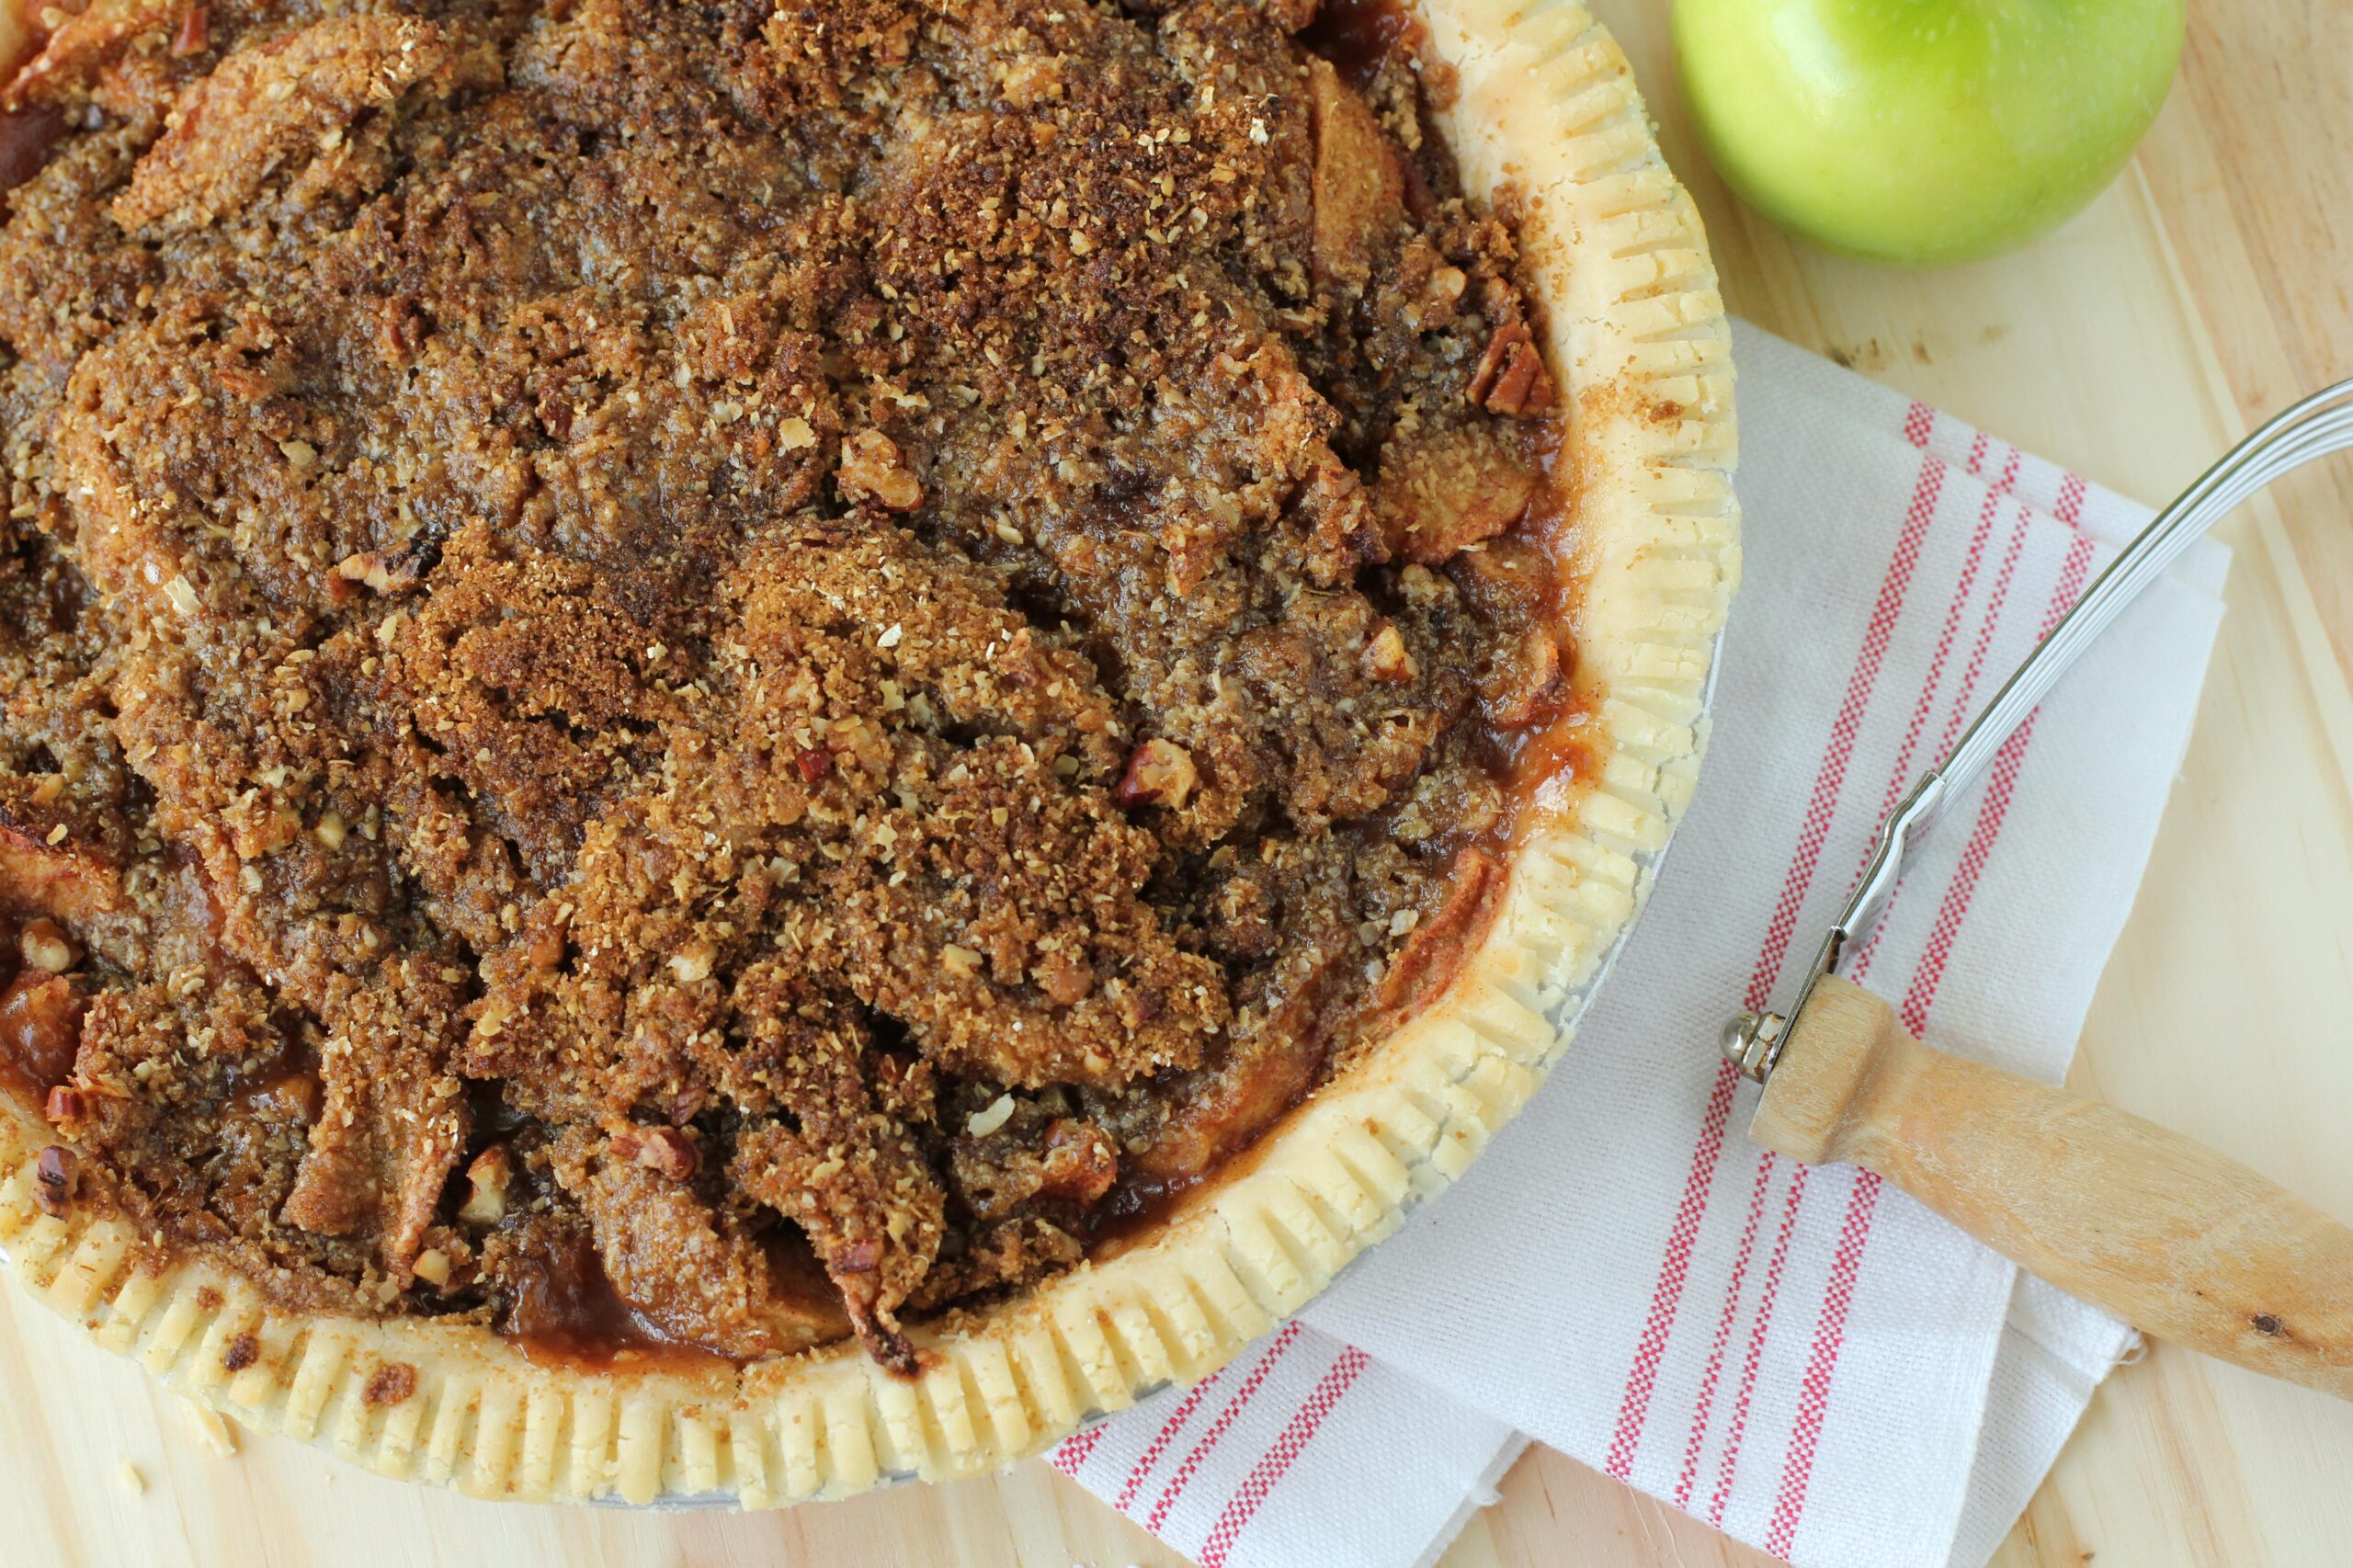  A crispy, gluten-free crust that is perfect for any pie